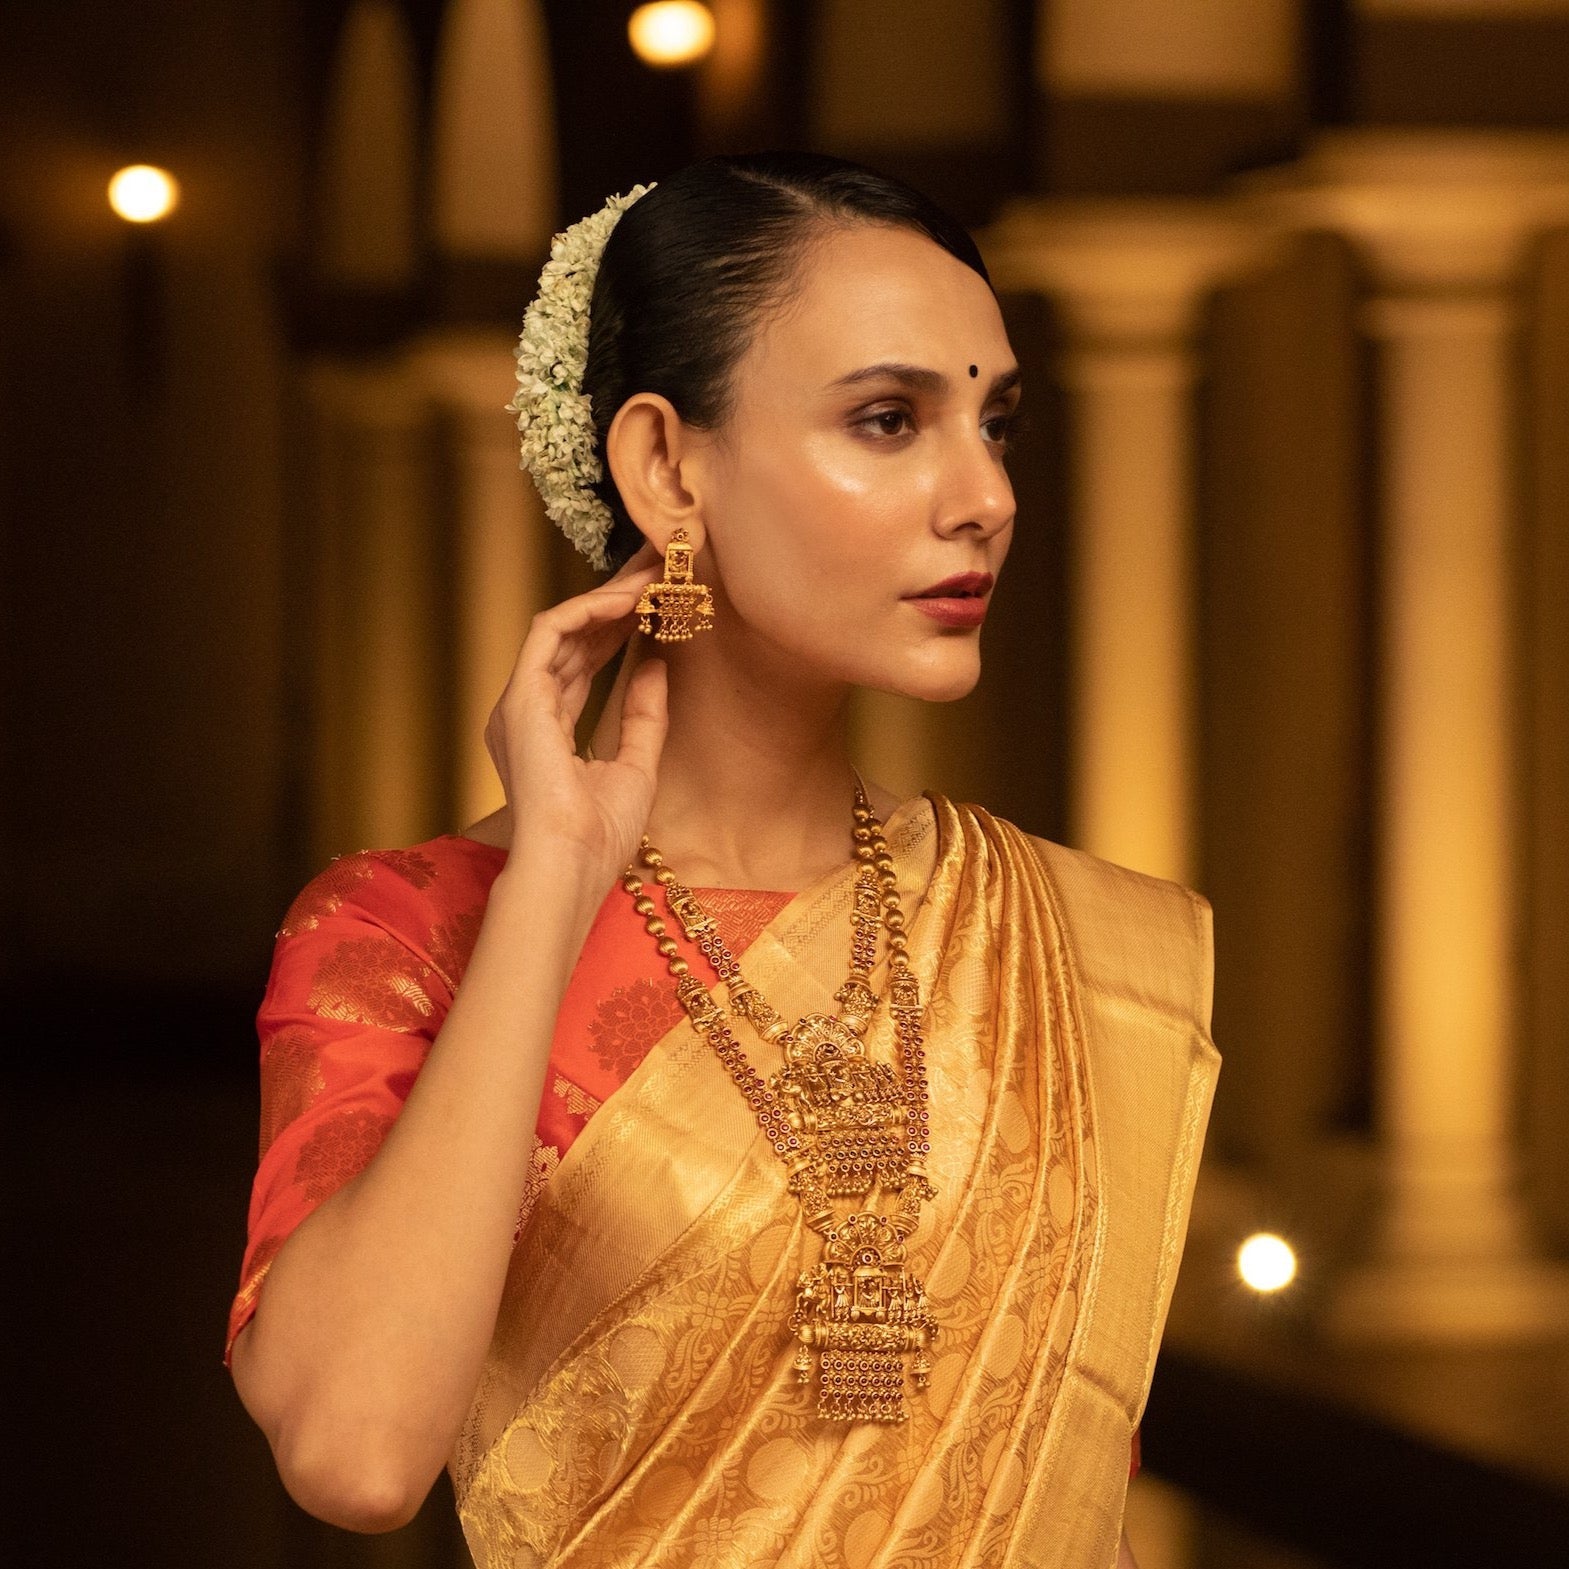 The best long necklaces to wear with Indian Bridal Lehengas